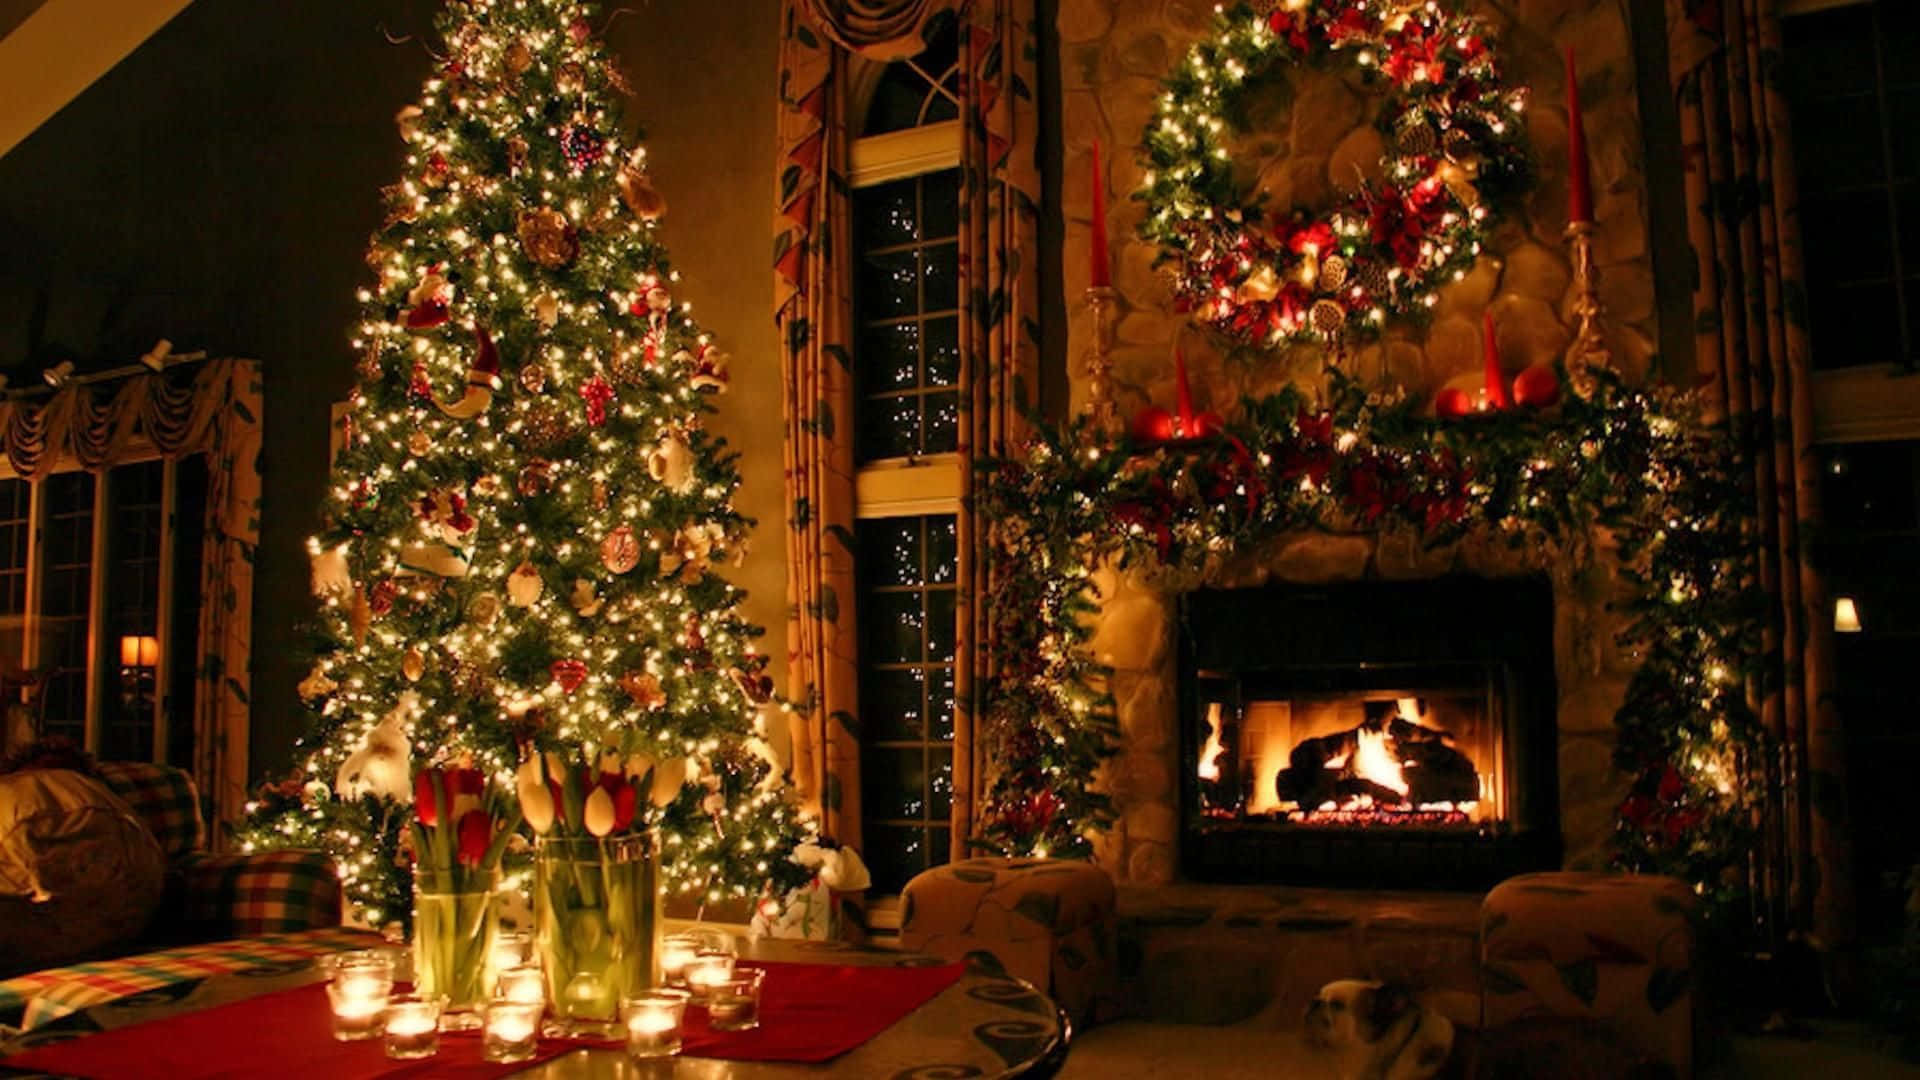 Christmas Tree In The Living Room With Candles And A Fireplace Wallpaper